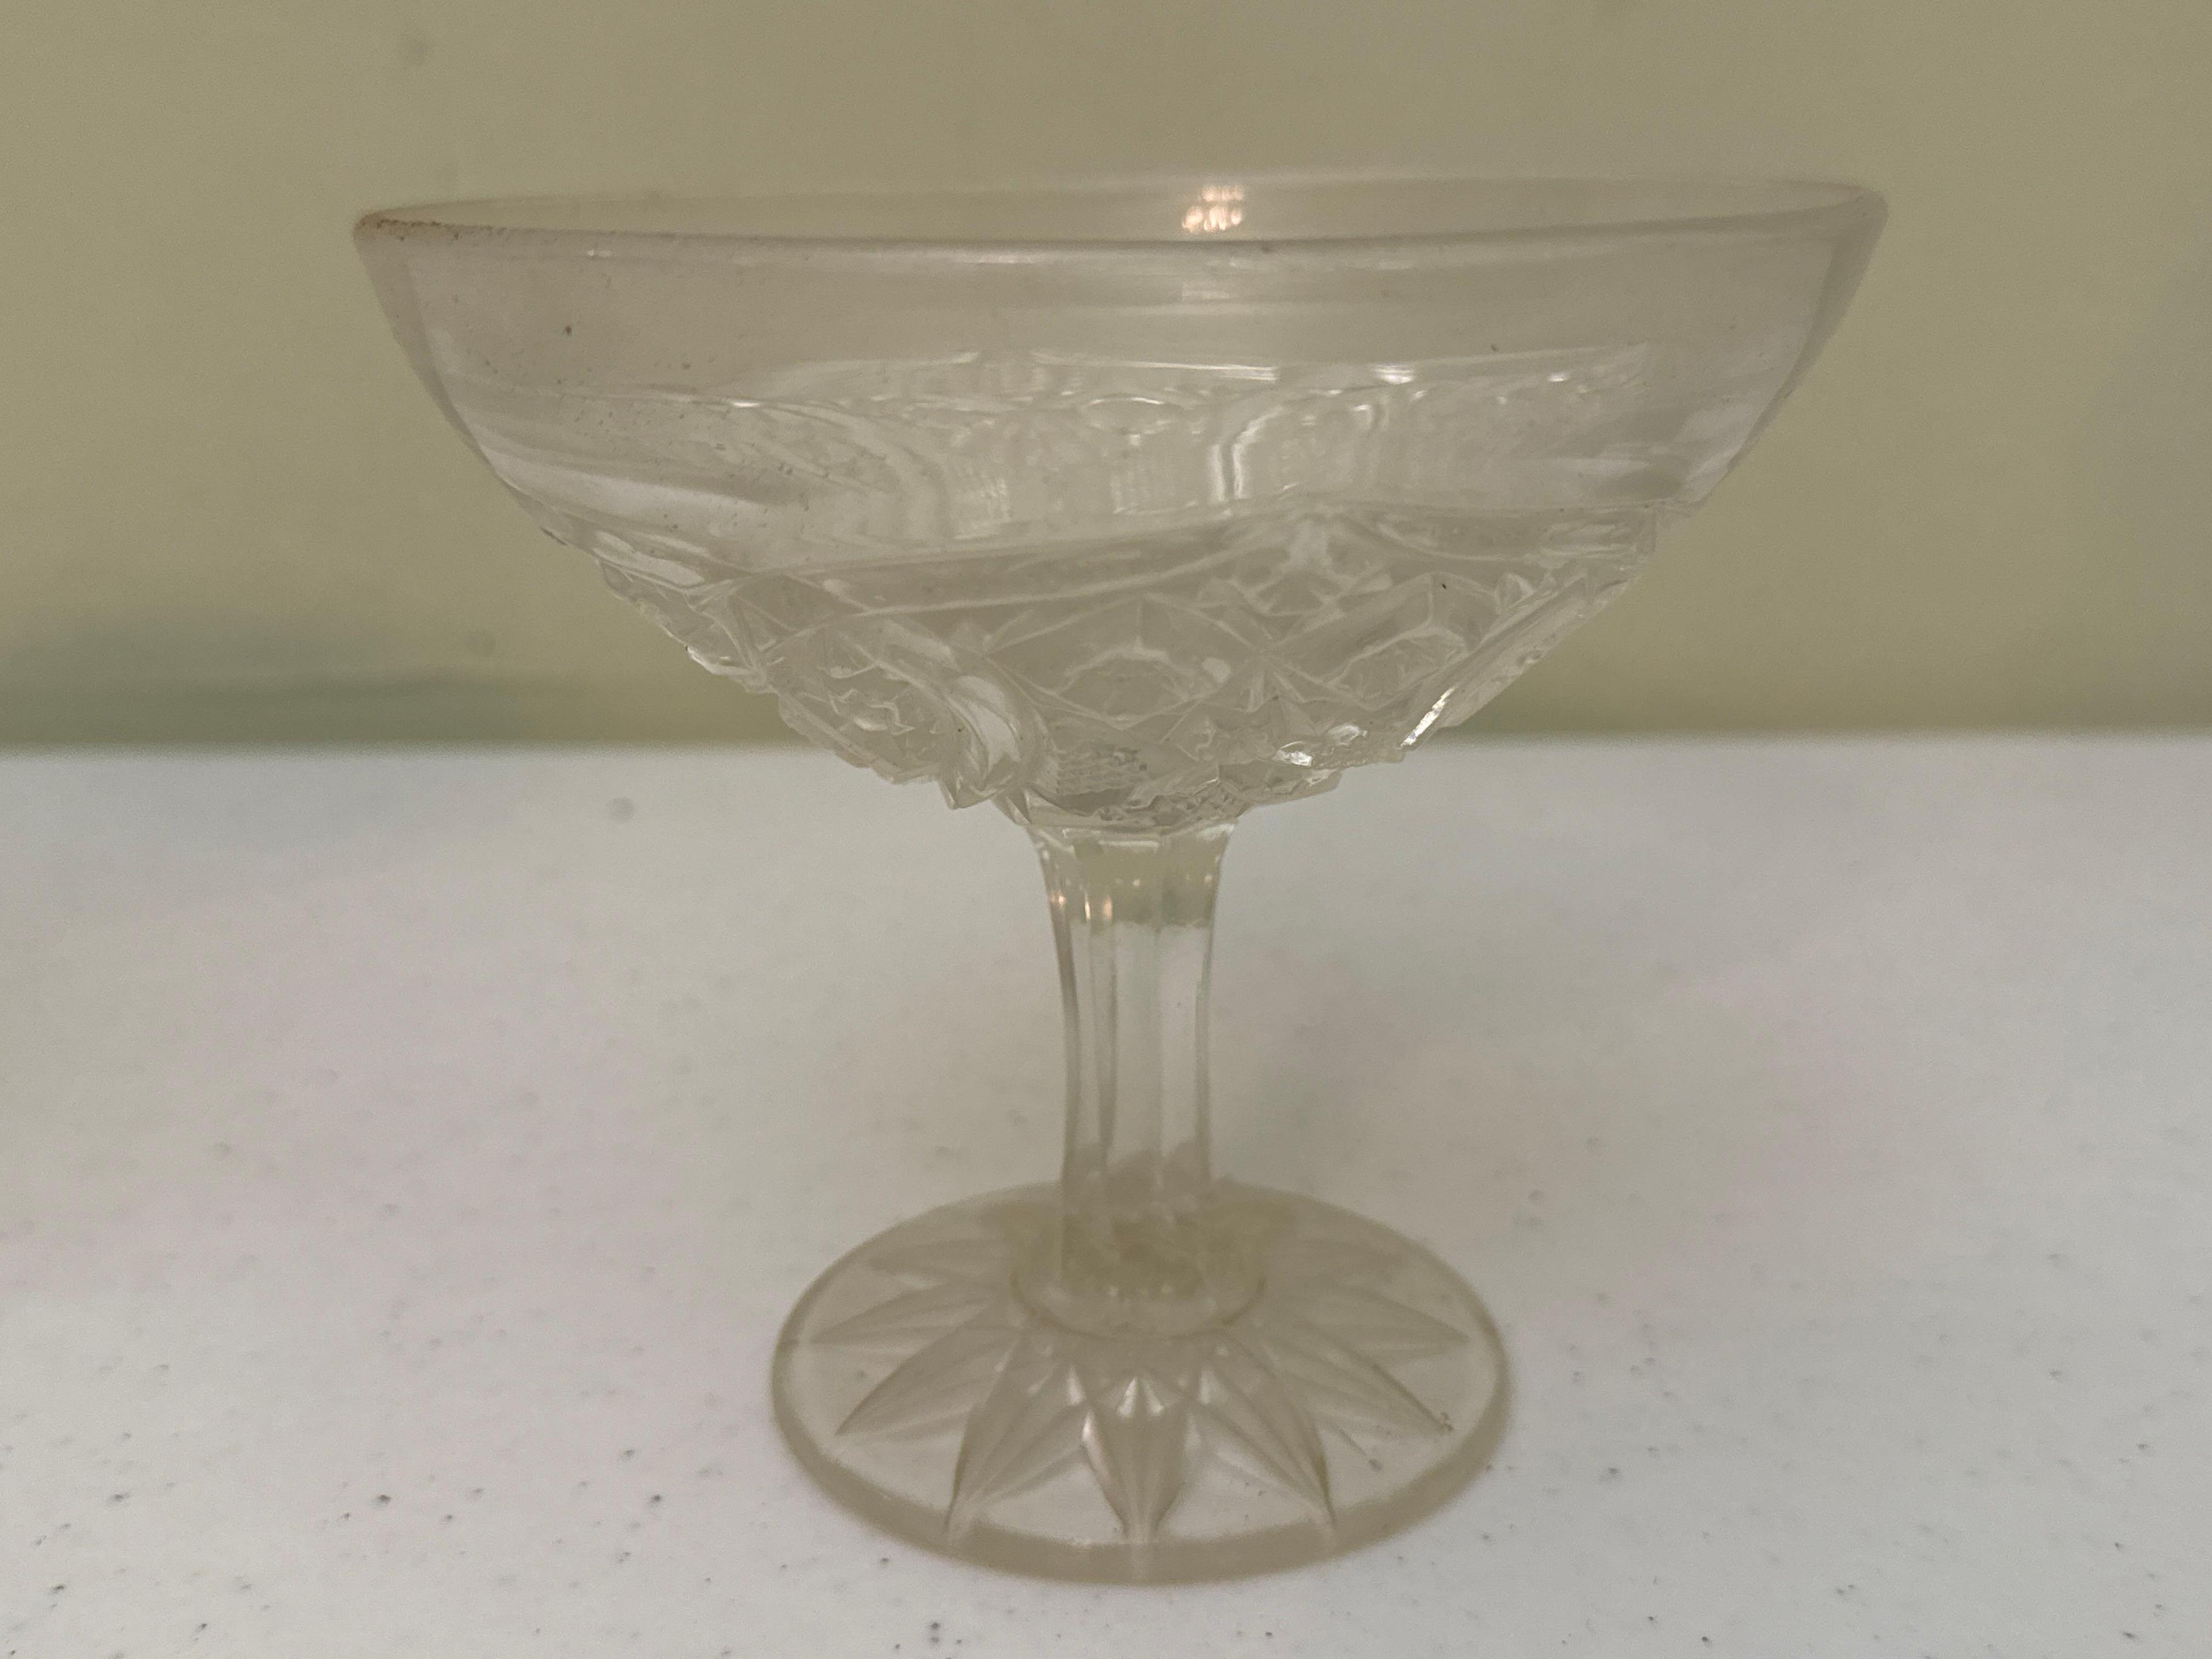 Molded Glass Compote Dishes & Bowls